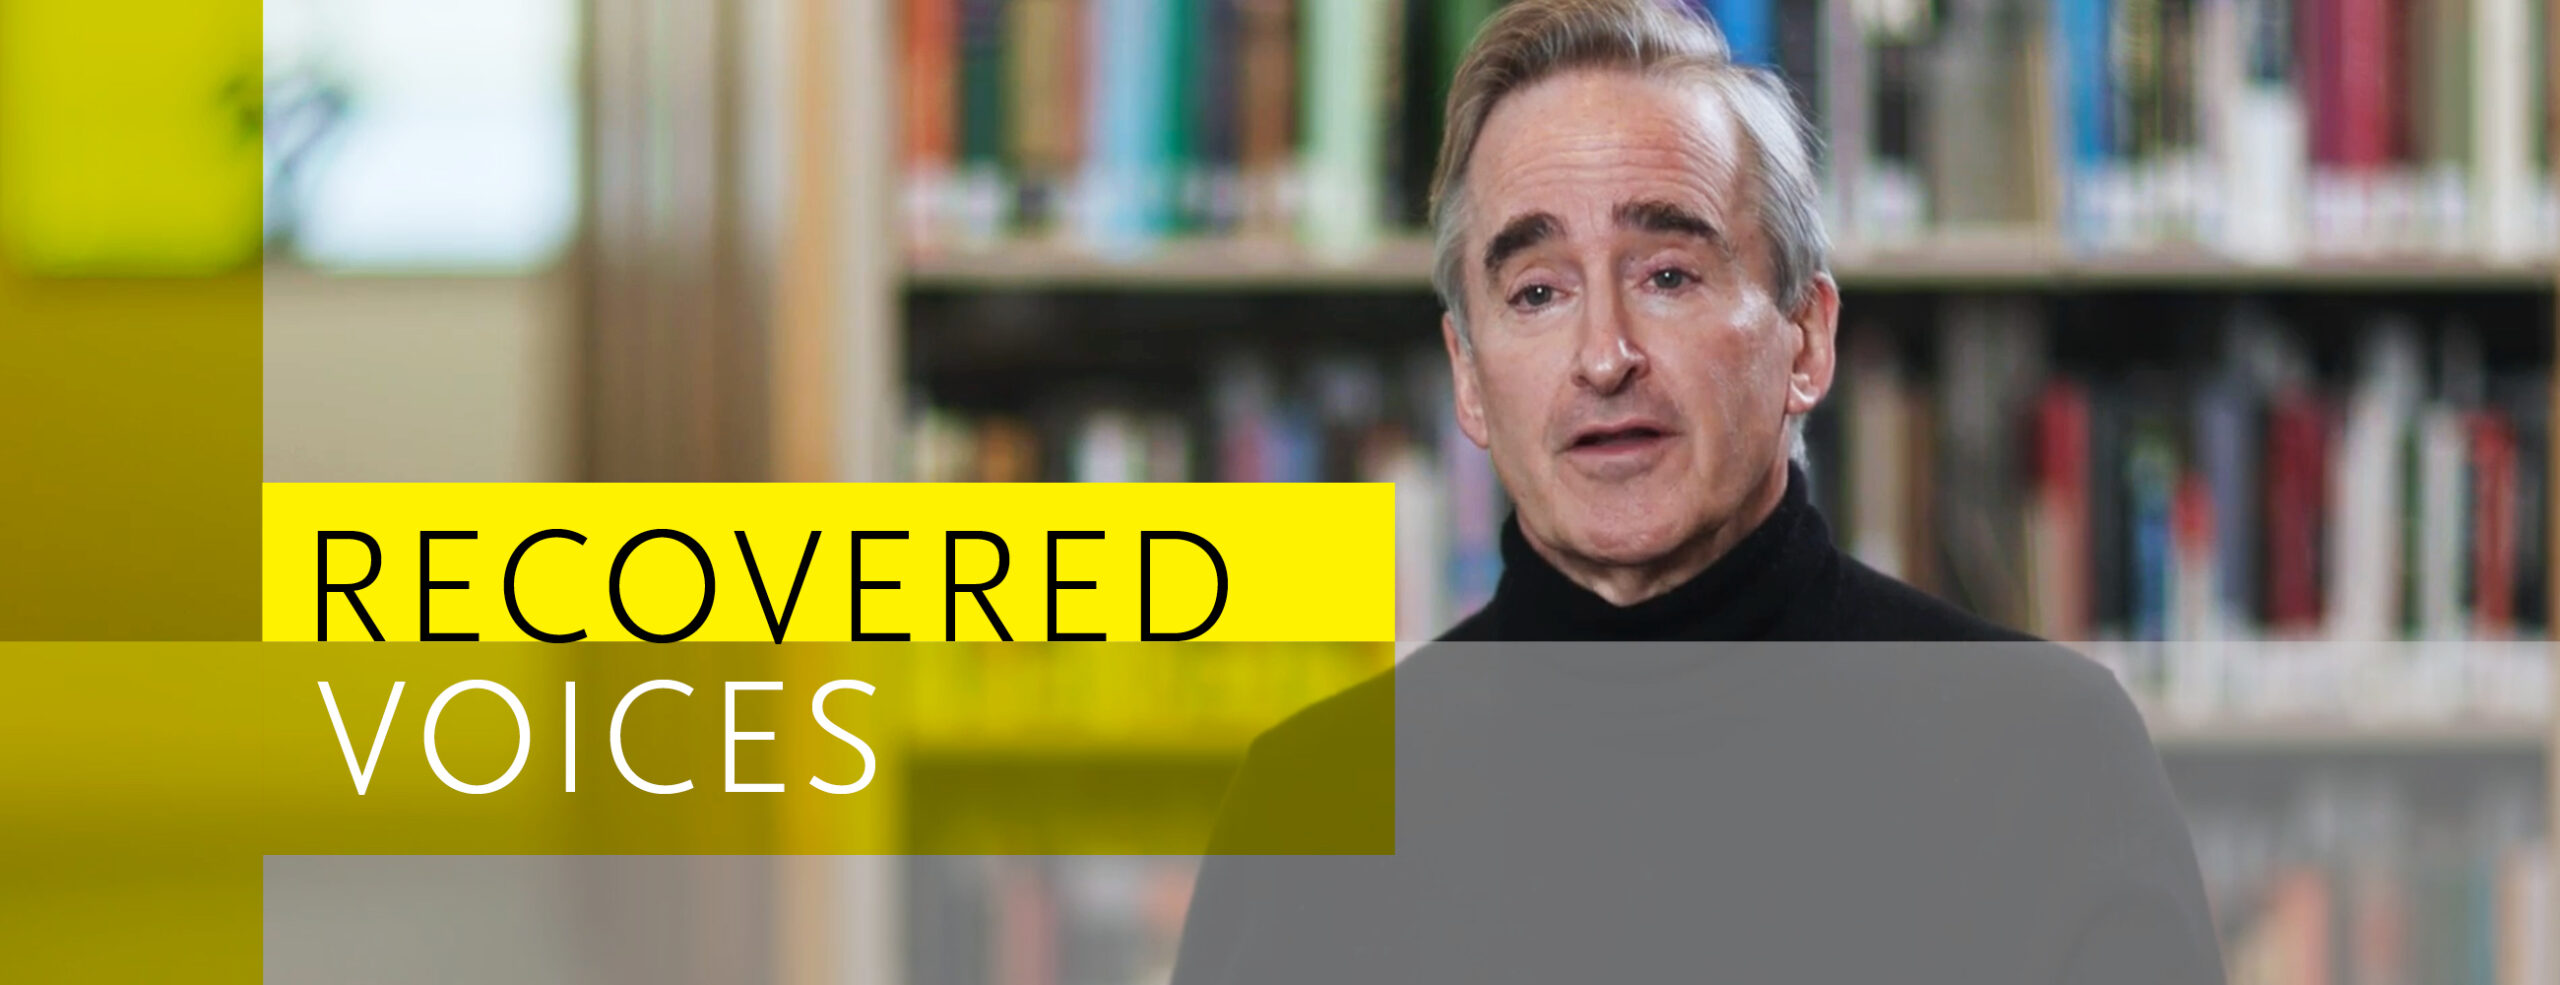 James Conlon in front of a bookshelf with Recovered Voices graphic